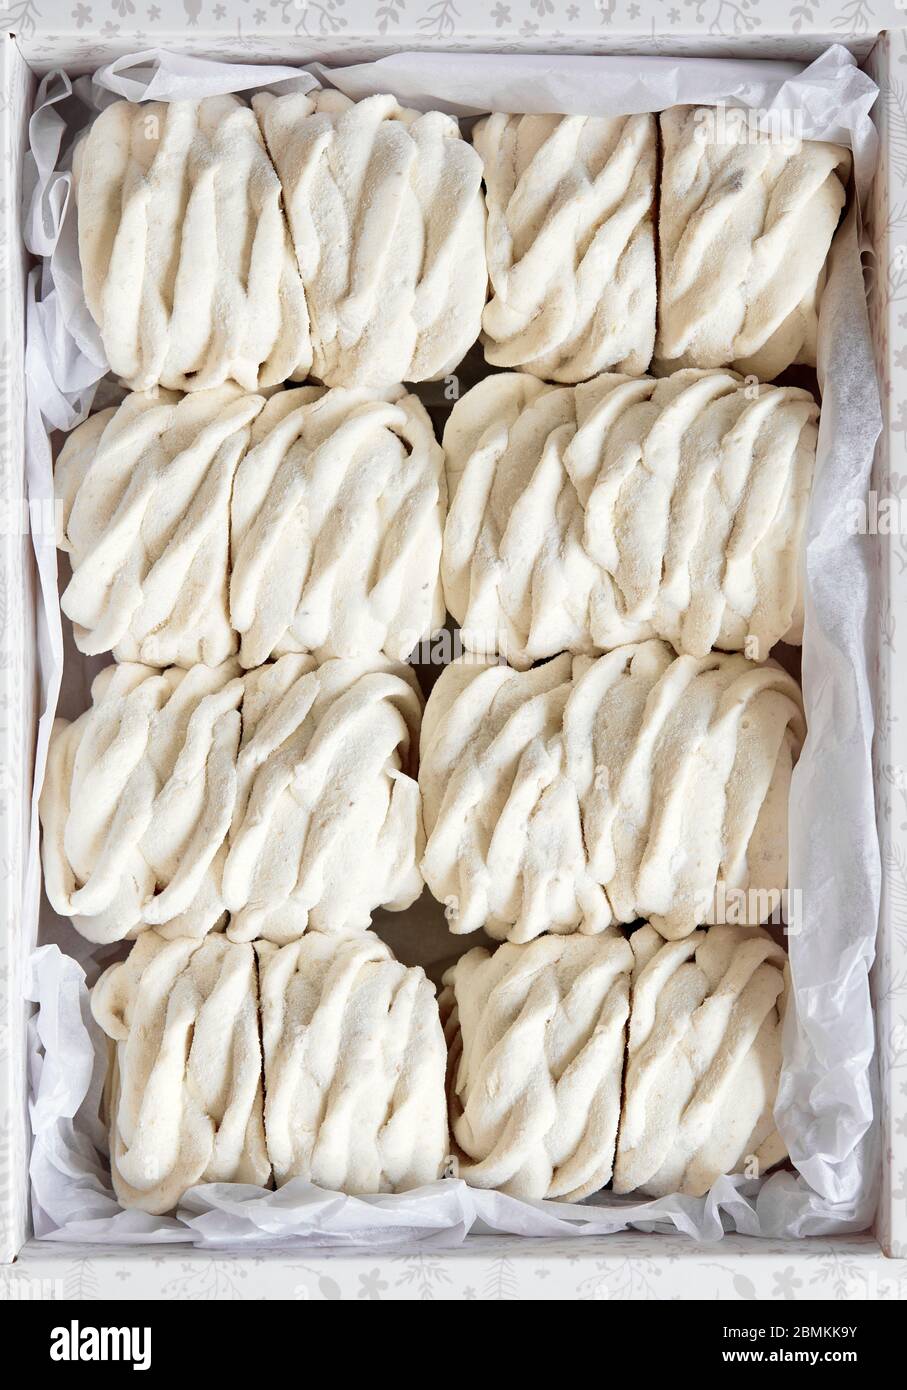 White natural sweet homemade Zephyr or Marshmallow in paper box top view Stock Photo